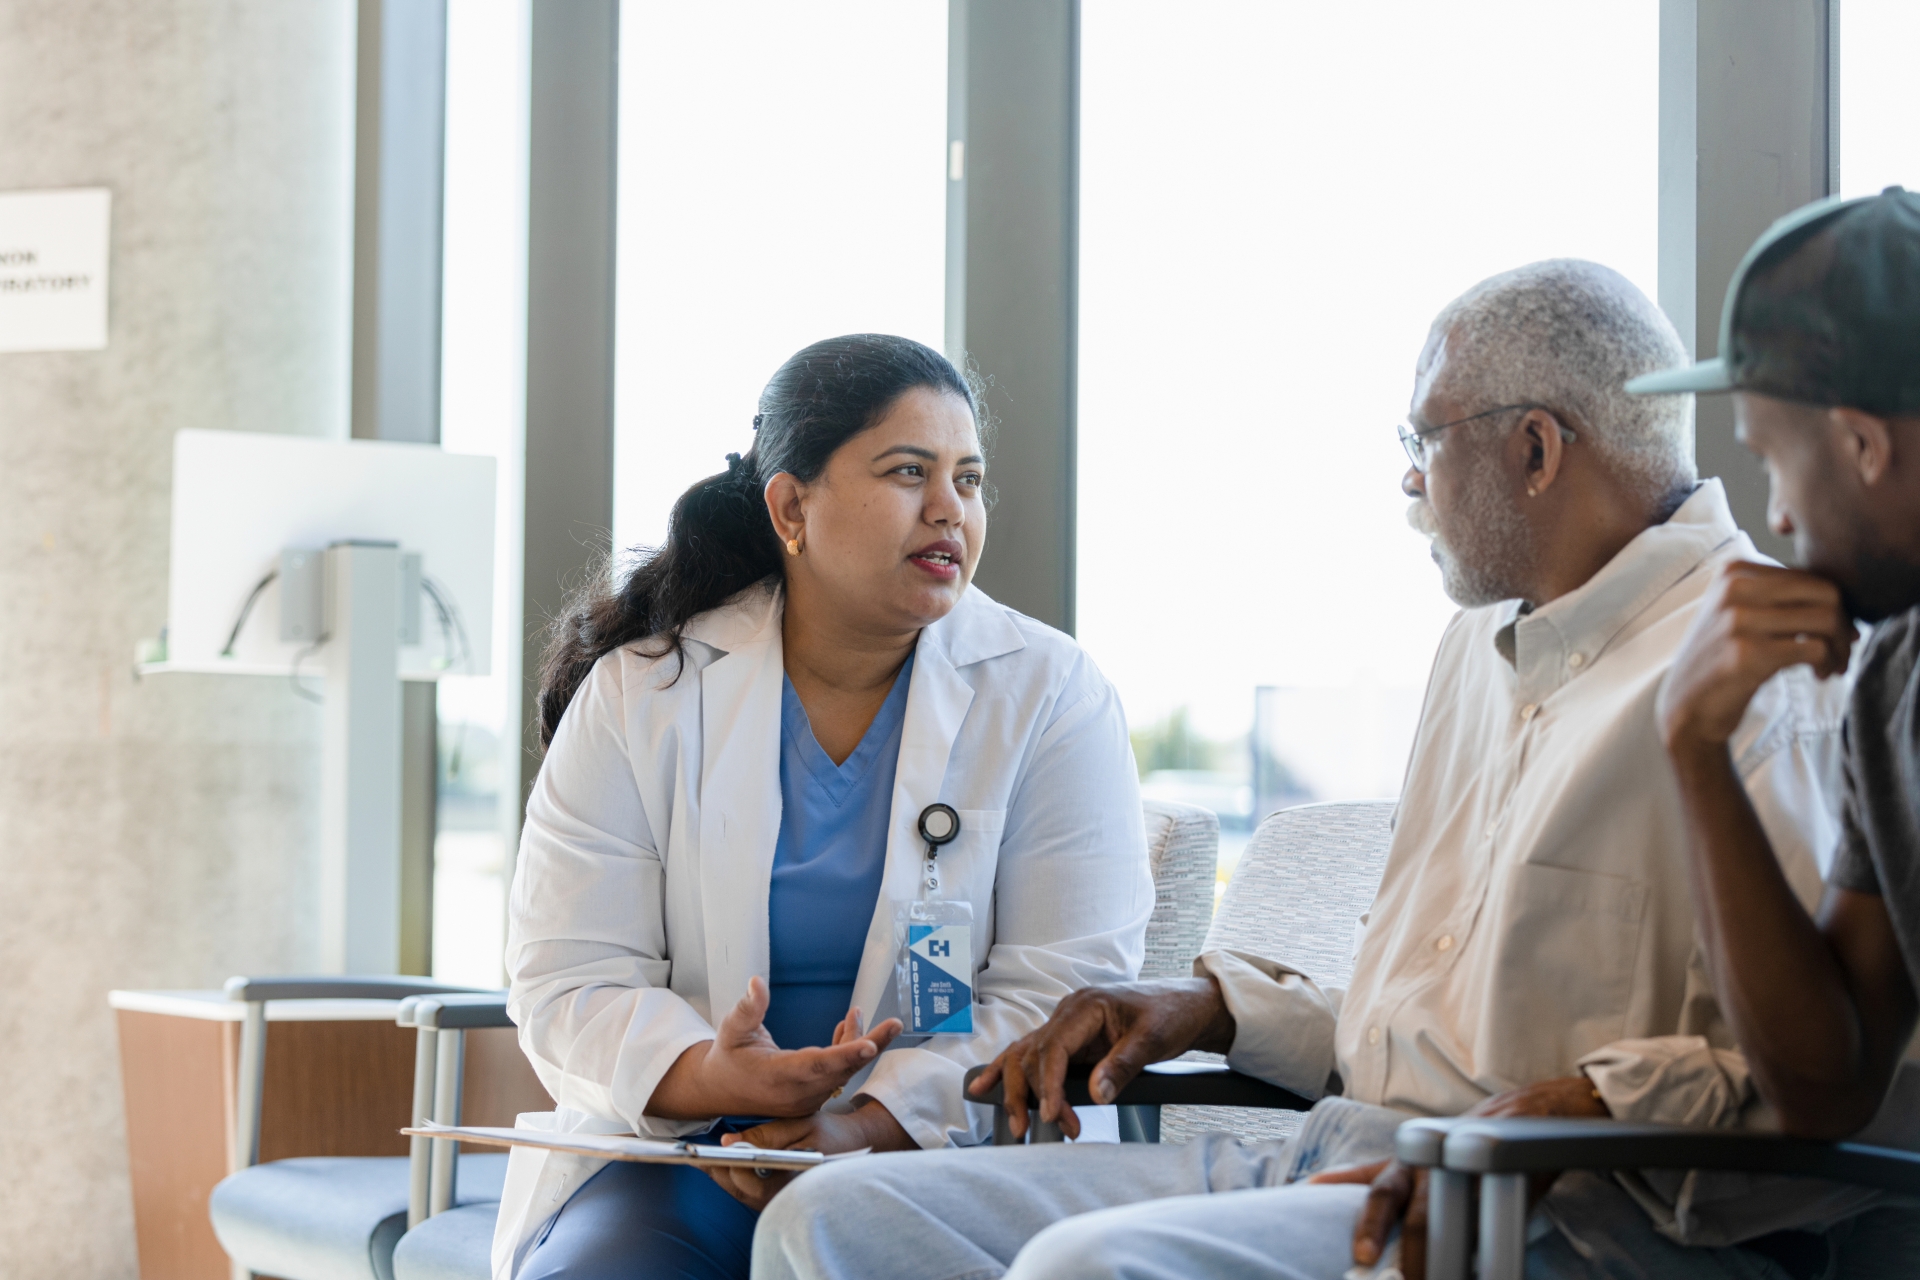 Compassionate female doctor discusses medical issues with senior patient